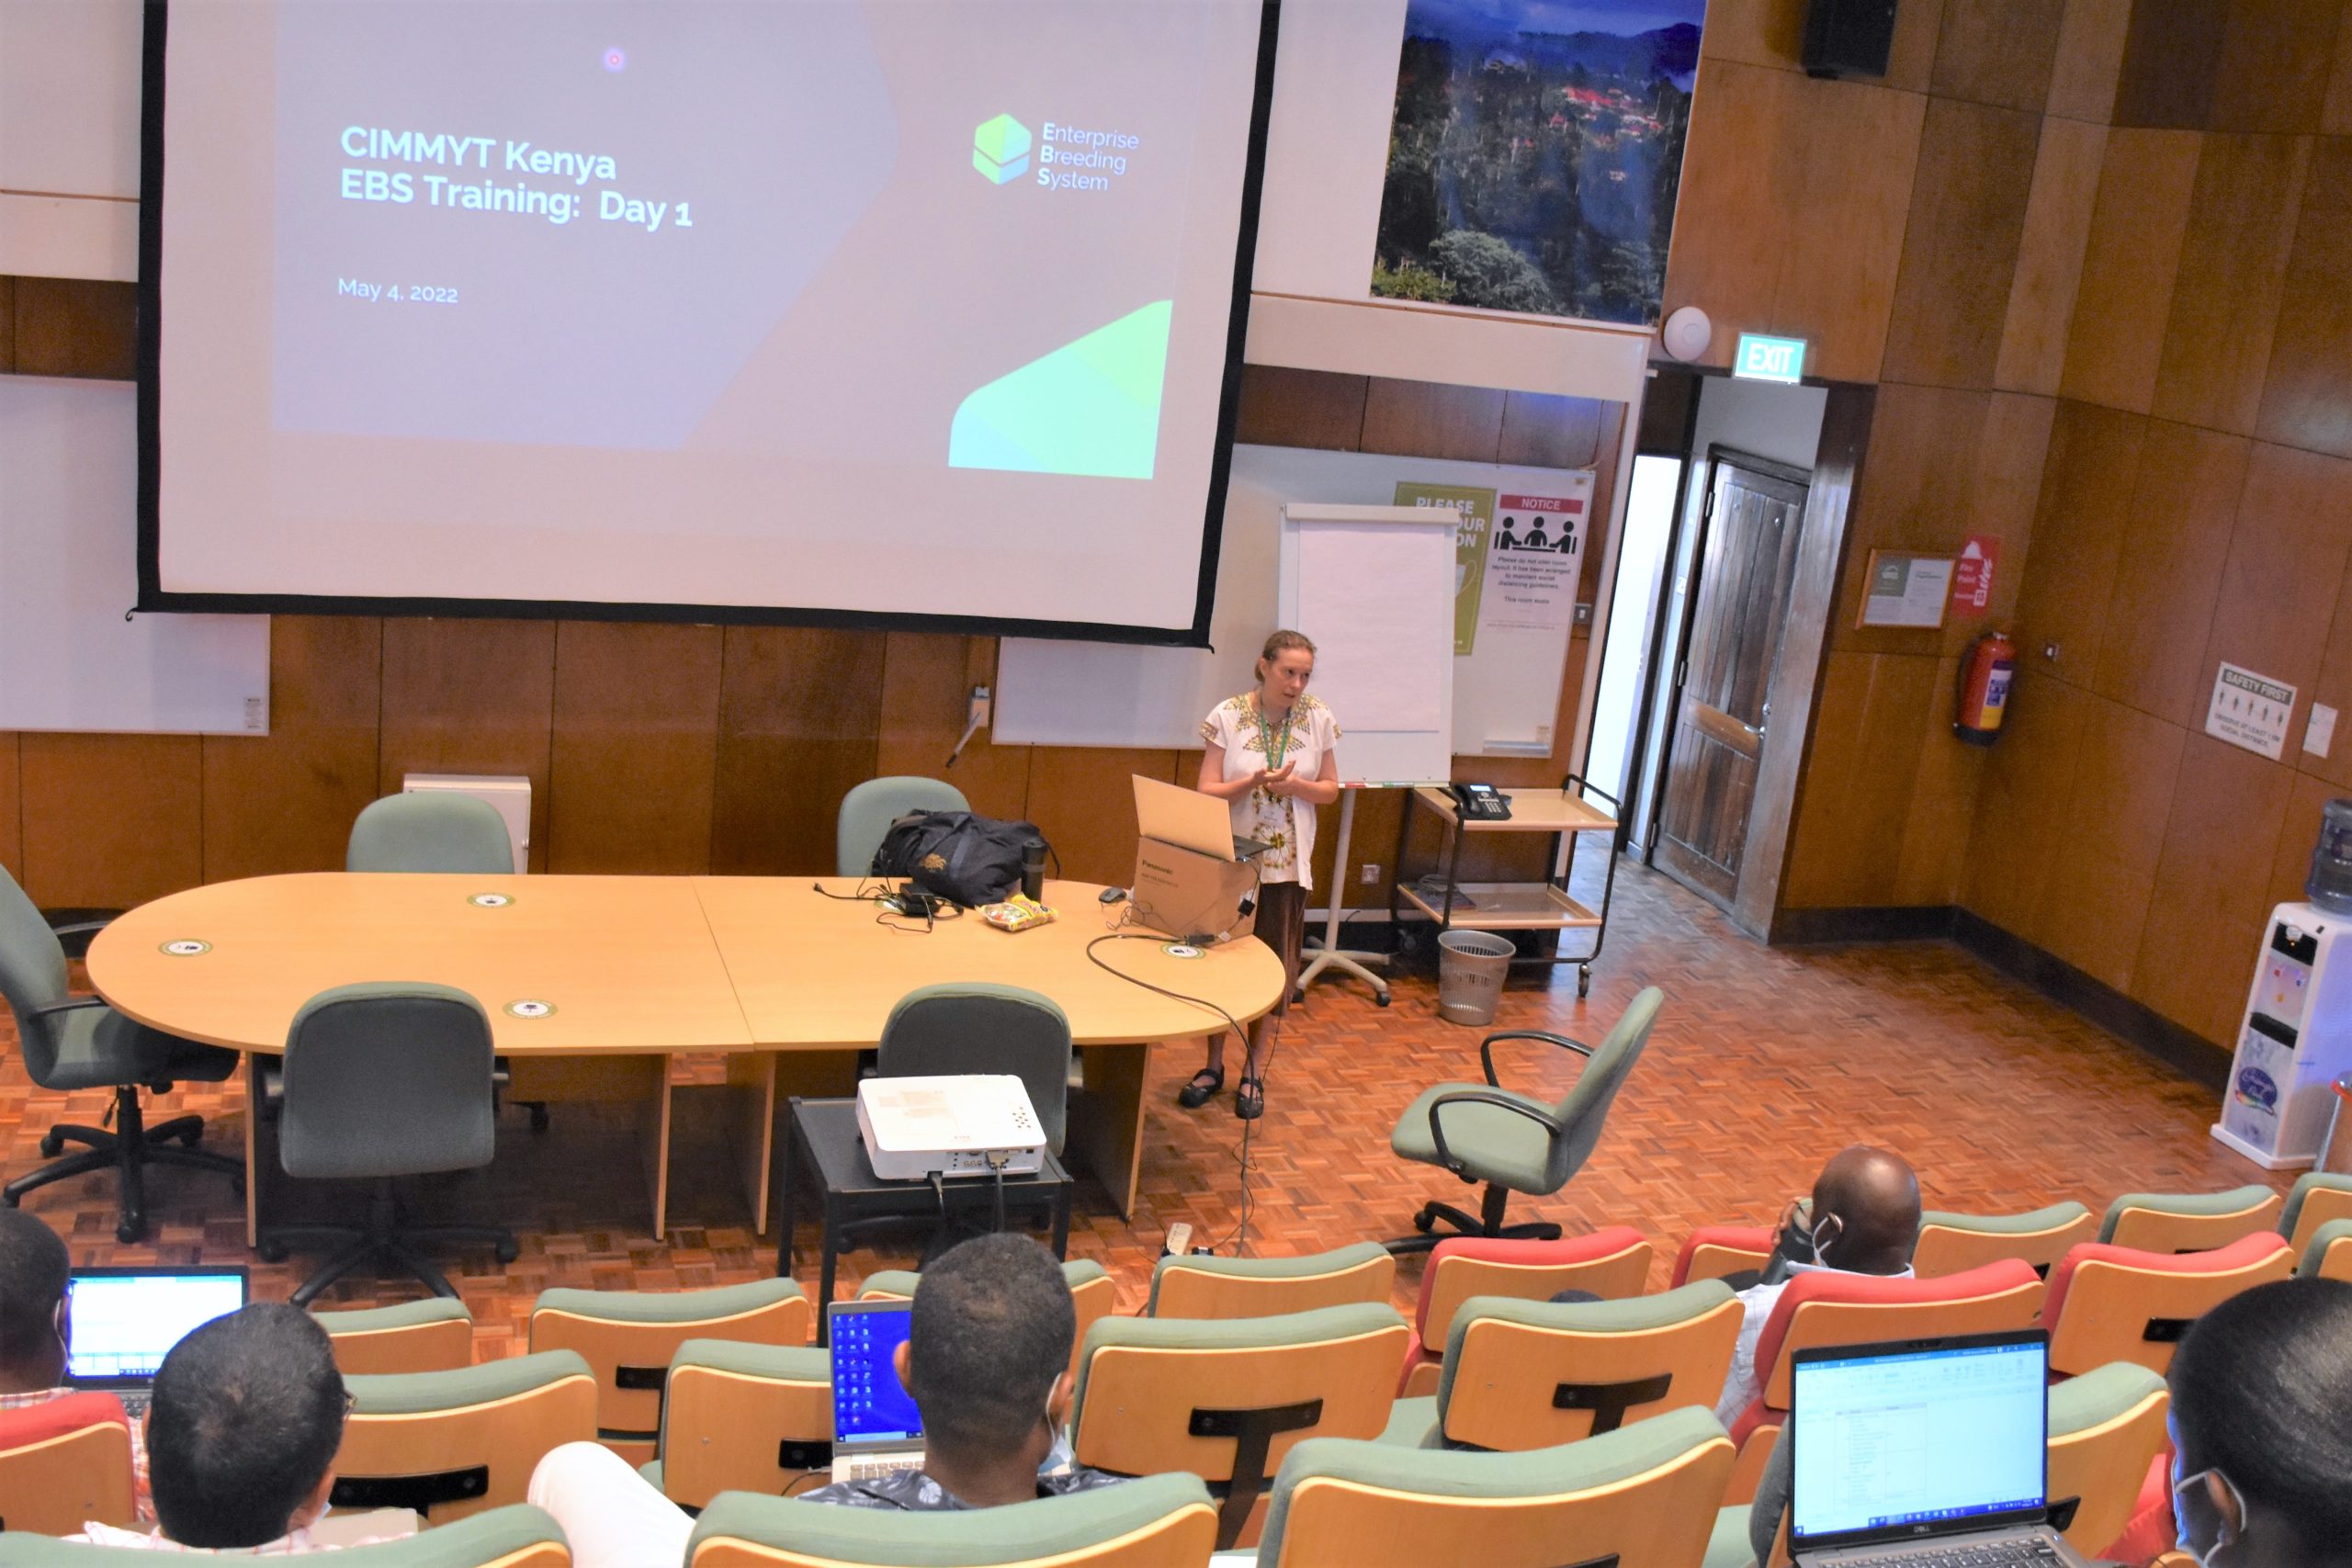 Kate Dreher, Data Manager at CIMMYT, presents to scientists, technicians, data management and support teams during the training on the Enterprise Breeding System (EBS) in Nairobi, Kenya. (Photo: Susan Umazi Otieno/CIMMYT)